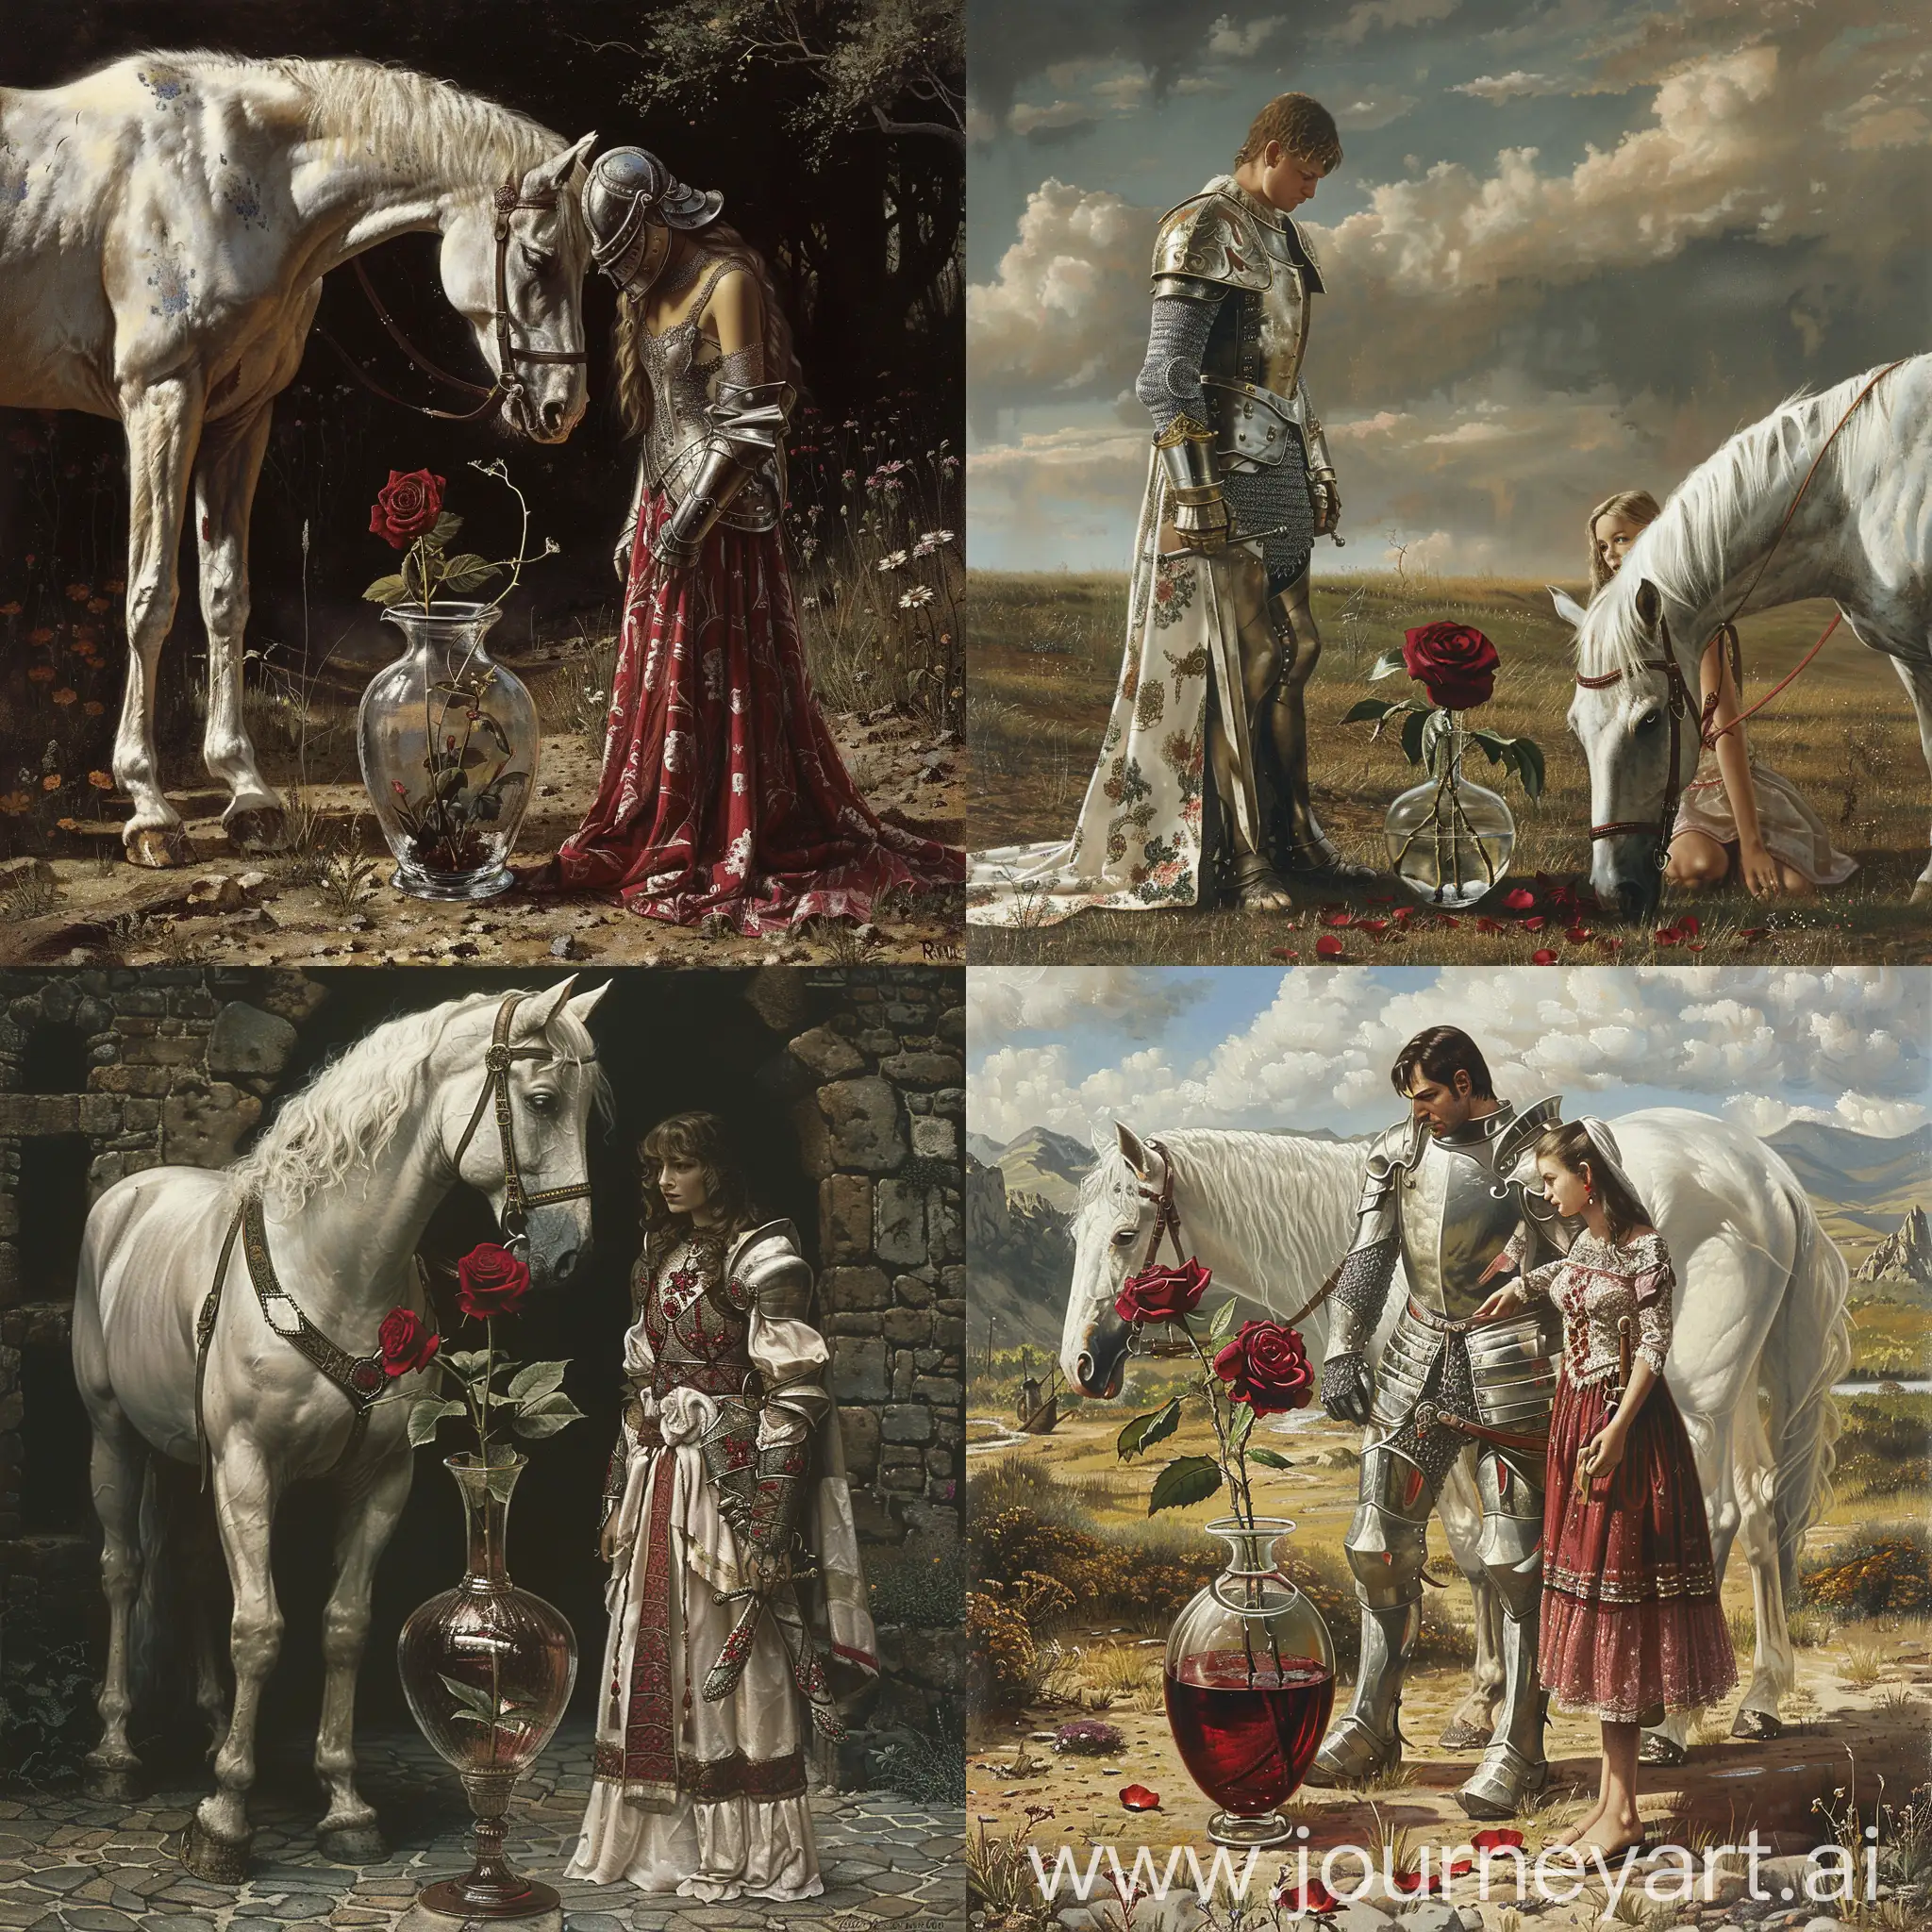 Medieval-Knight-with-a-Crimson-Rose-Elegant-Girl-and-White-Horse-Portrait